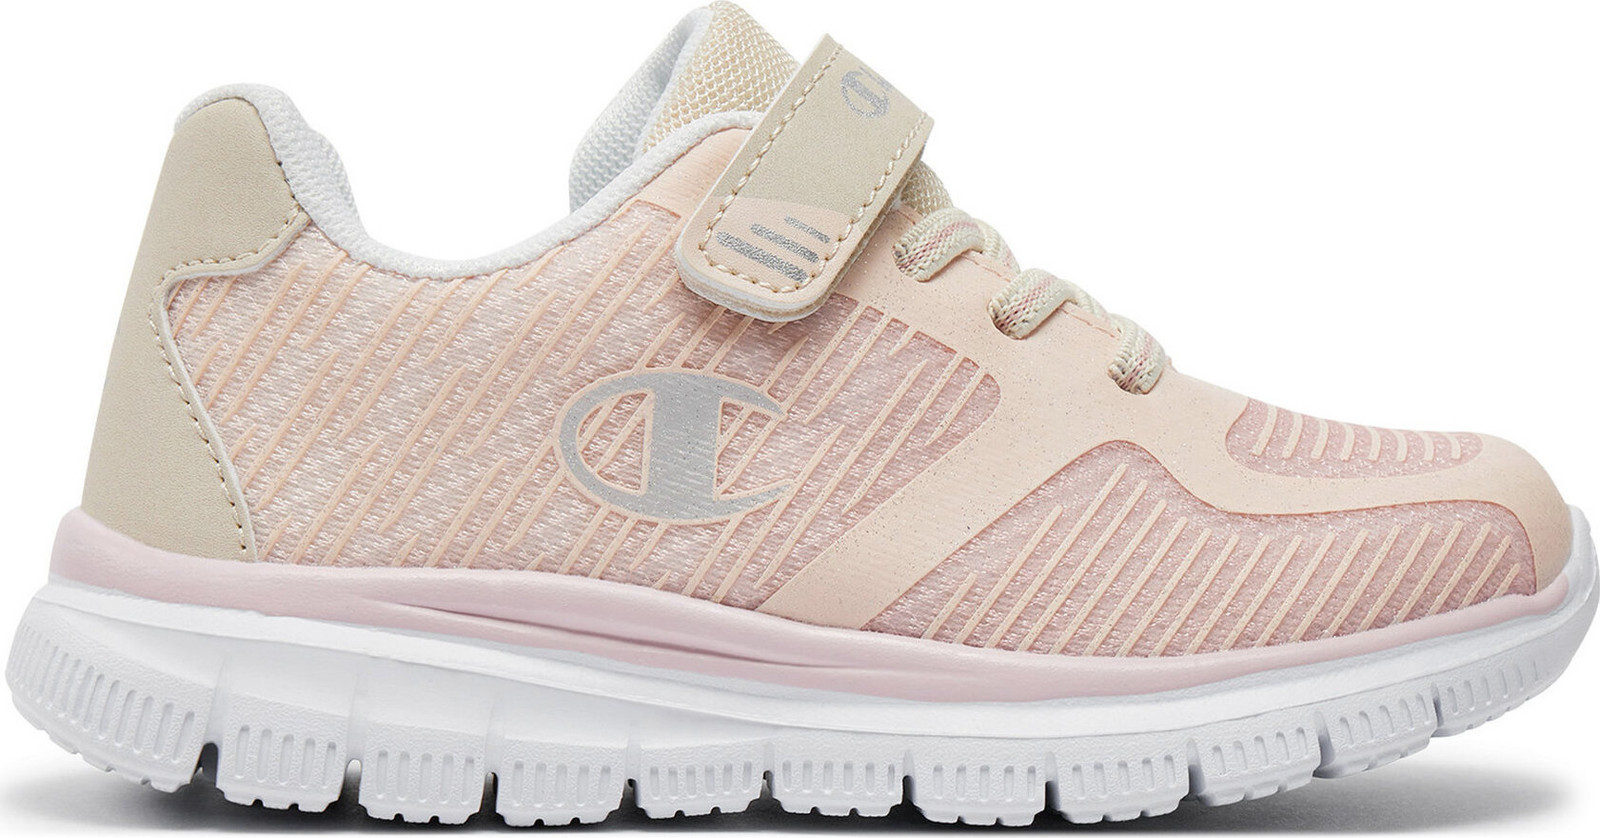 Sneakersy Champion Runway G Ps Low Cut Shoe S32843-CHA-PS128 Pink/Silver